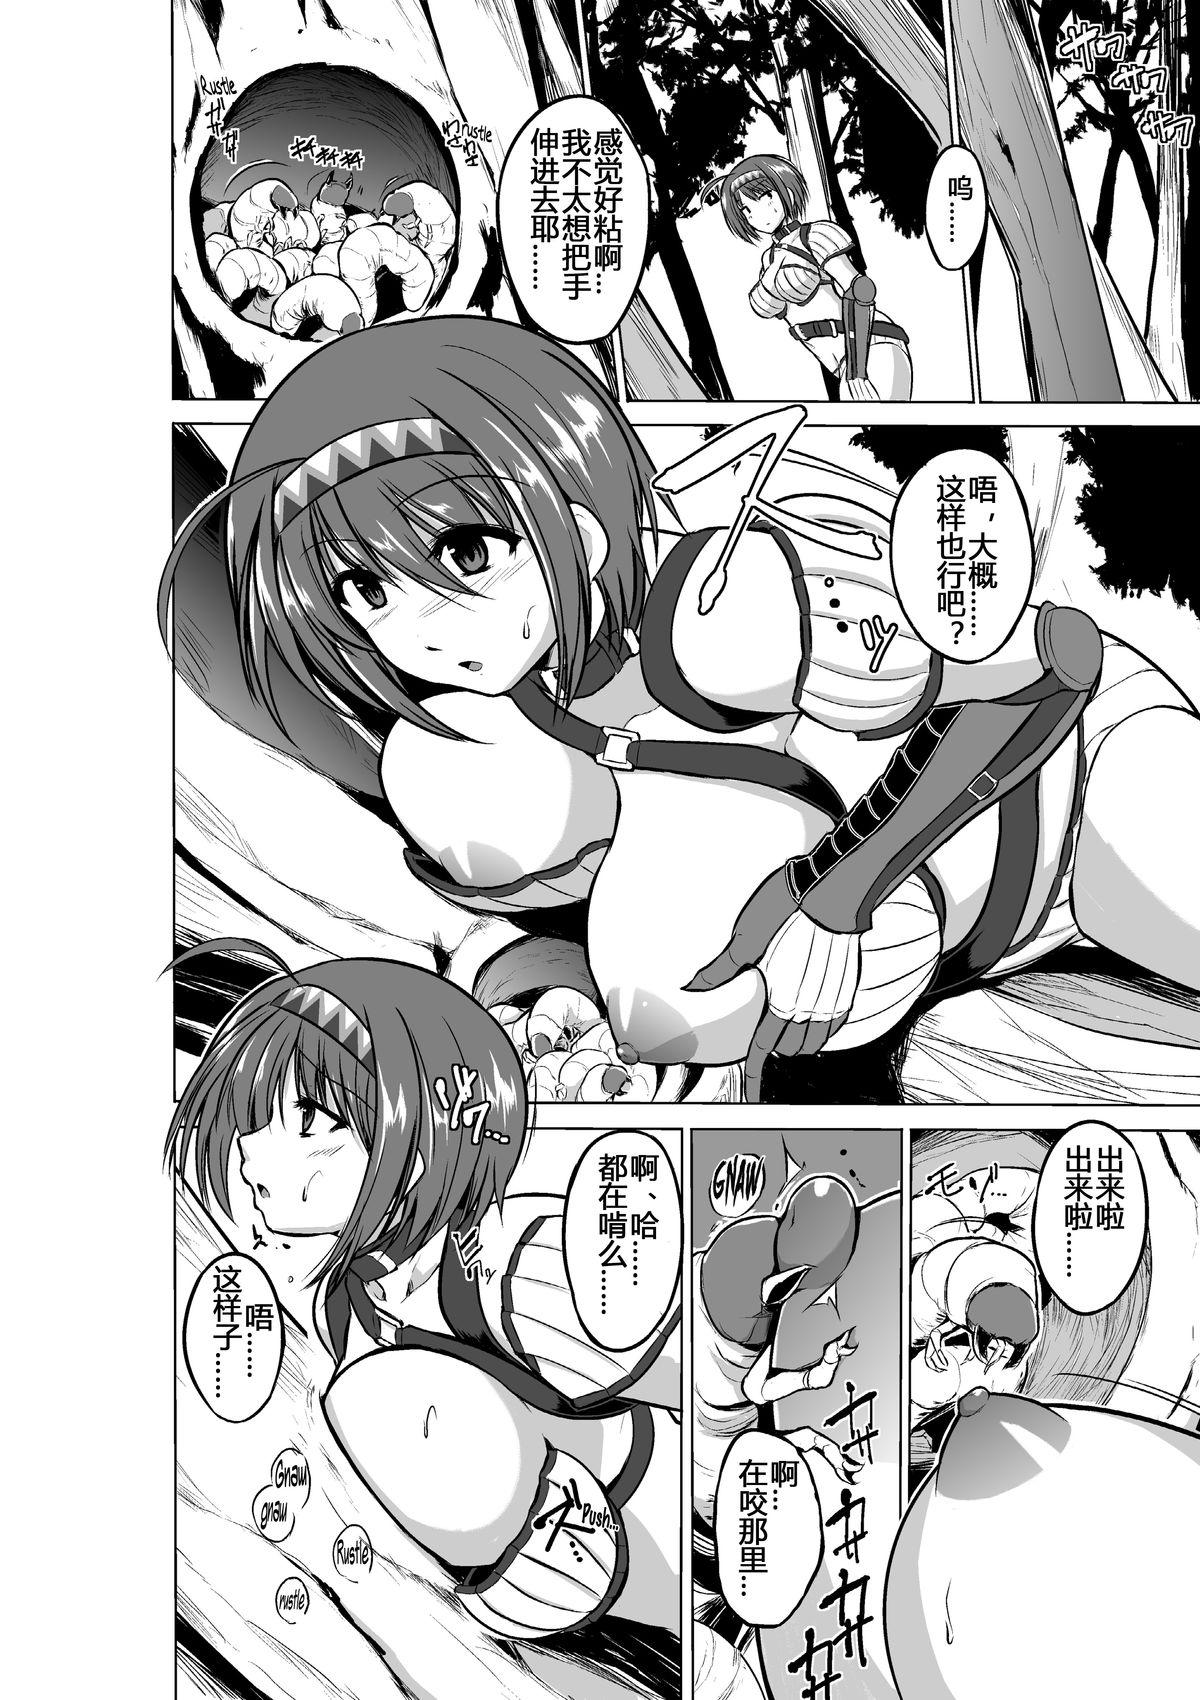 Periscope Dungeon Travelers - Chie no Himegoto - Toheart2 Topless - Page 6